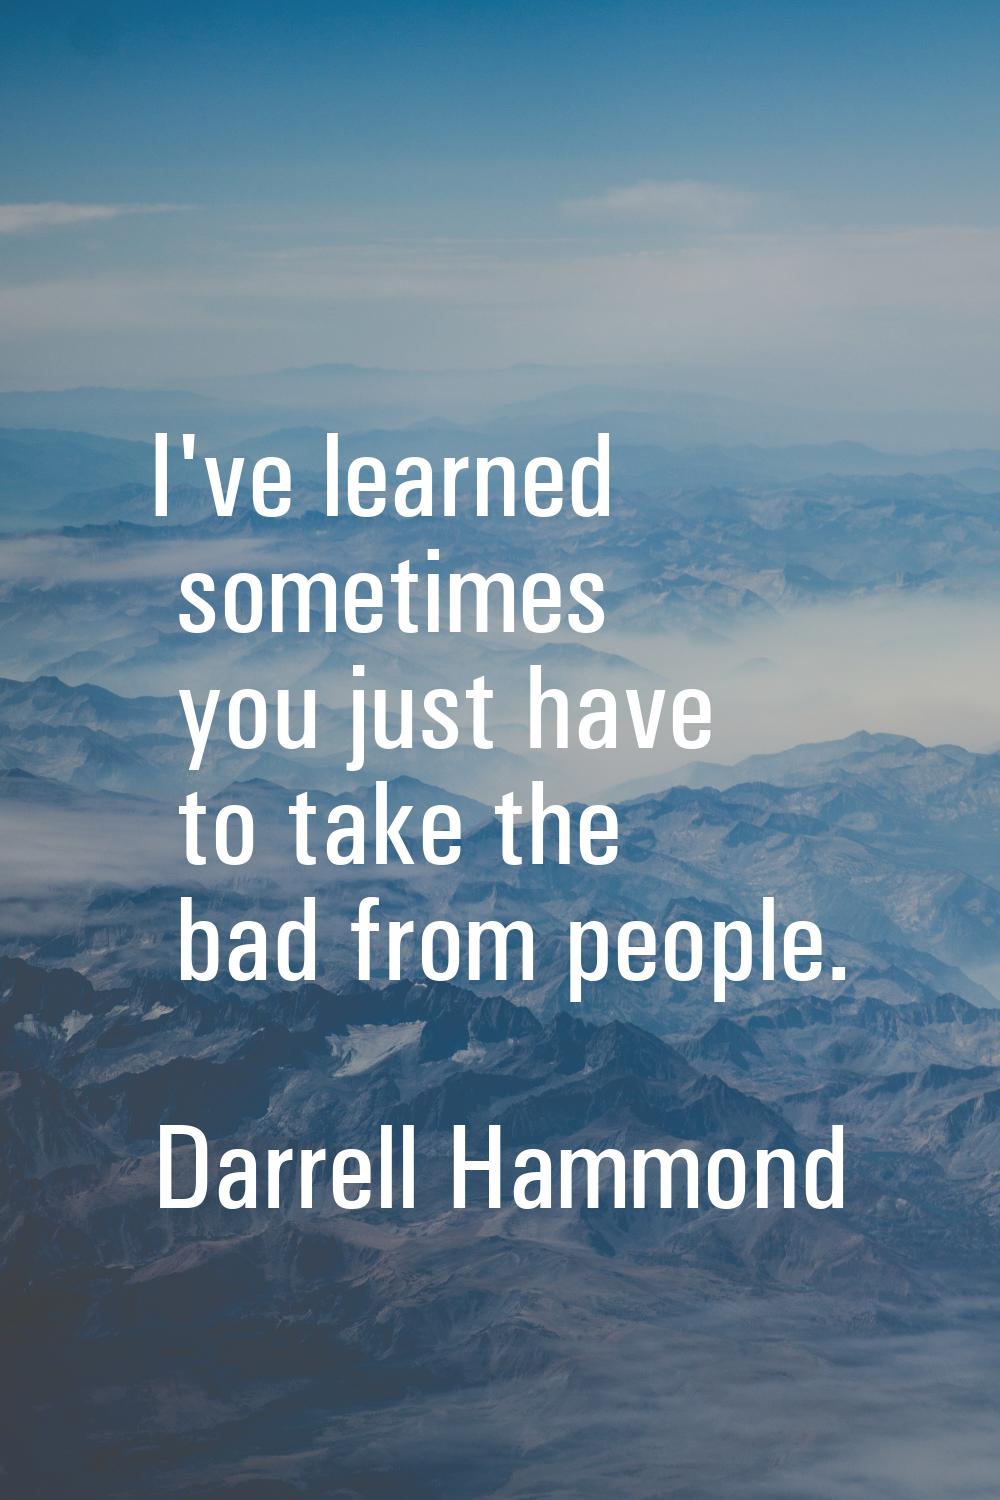 I've learned sometimes you just have to take the bad from people.